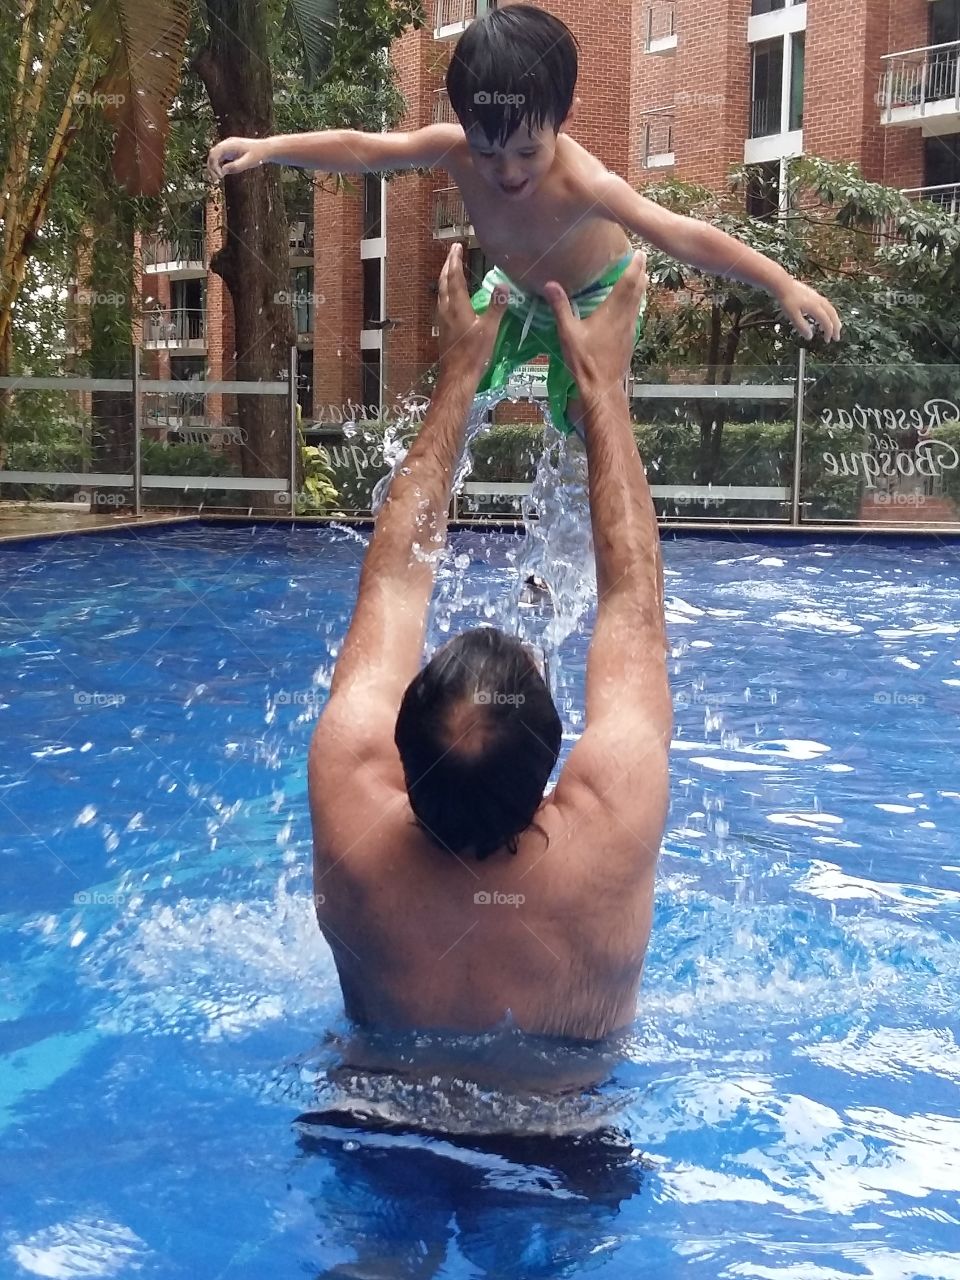 Father and son summer fun at the pool